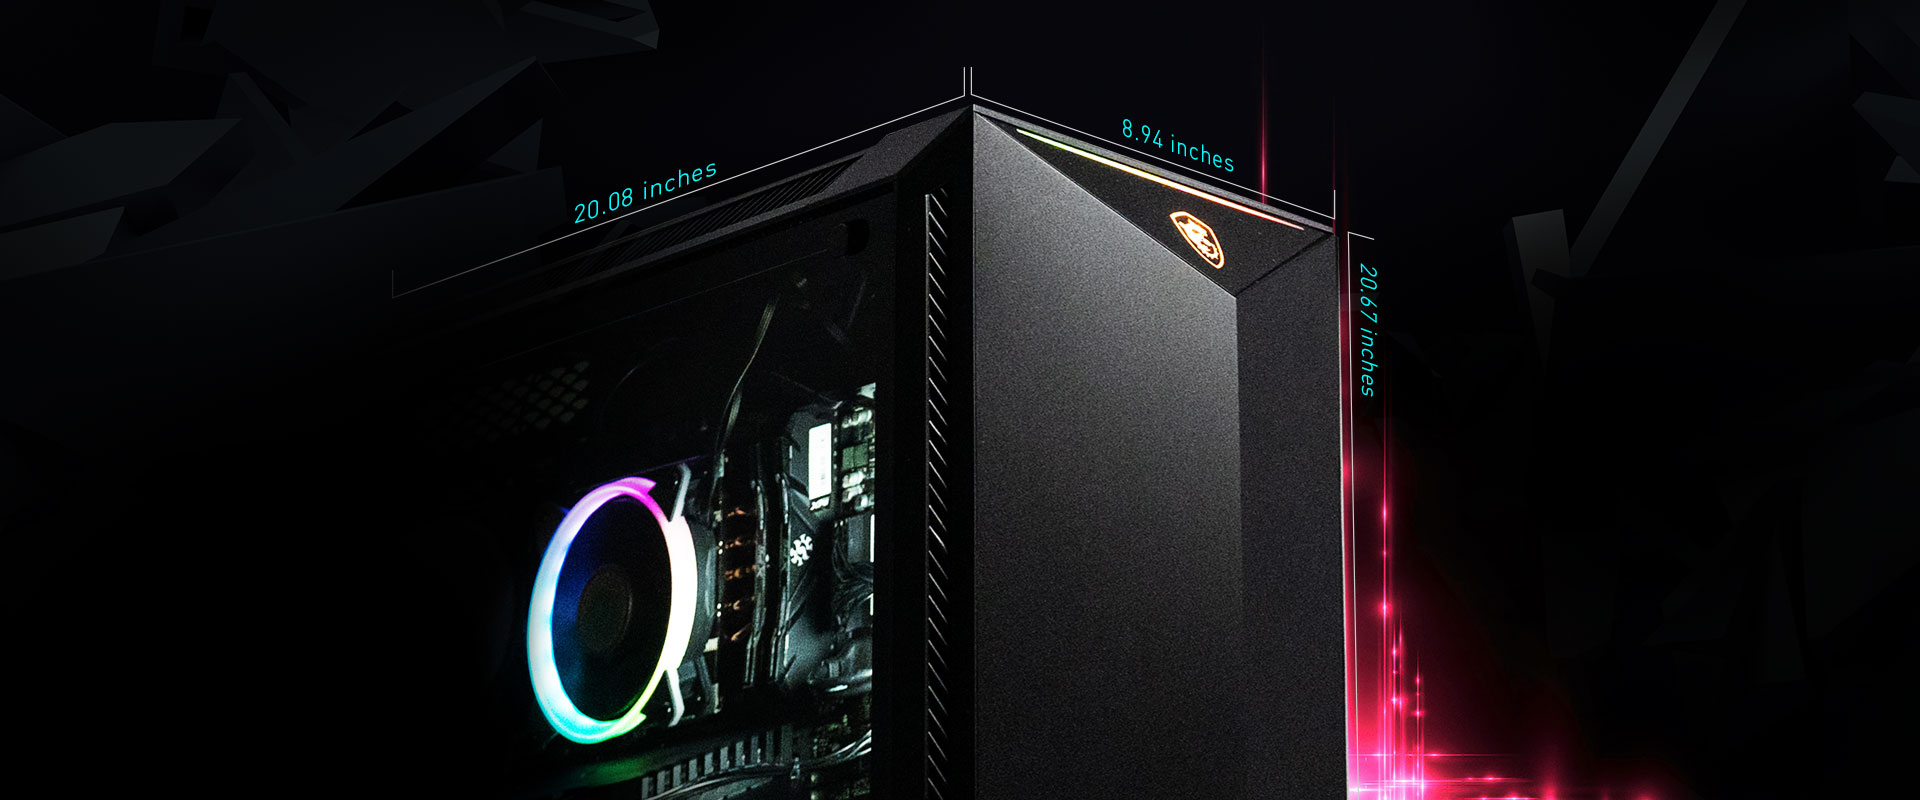 Main specification: MS GUNGNIR 100 CASE, RTX 2060 SUPER, MSI Z390 MOTHERBOARD, 1TB SSD, 9TH GEN CORE I7 and 16GB DDR4 3000MHZ 